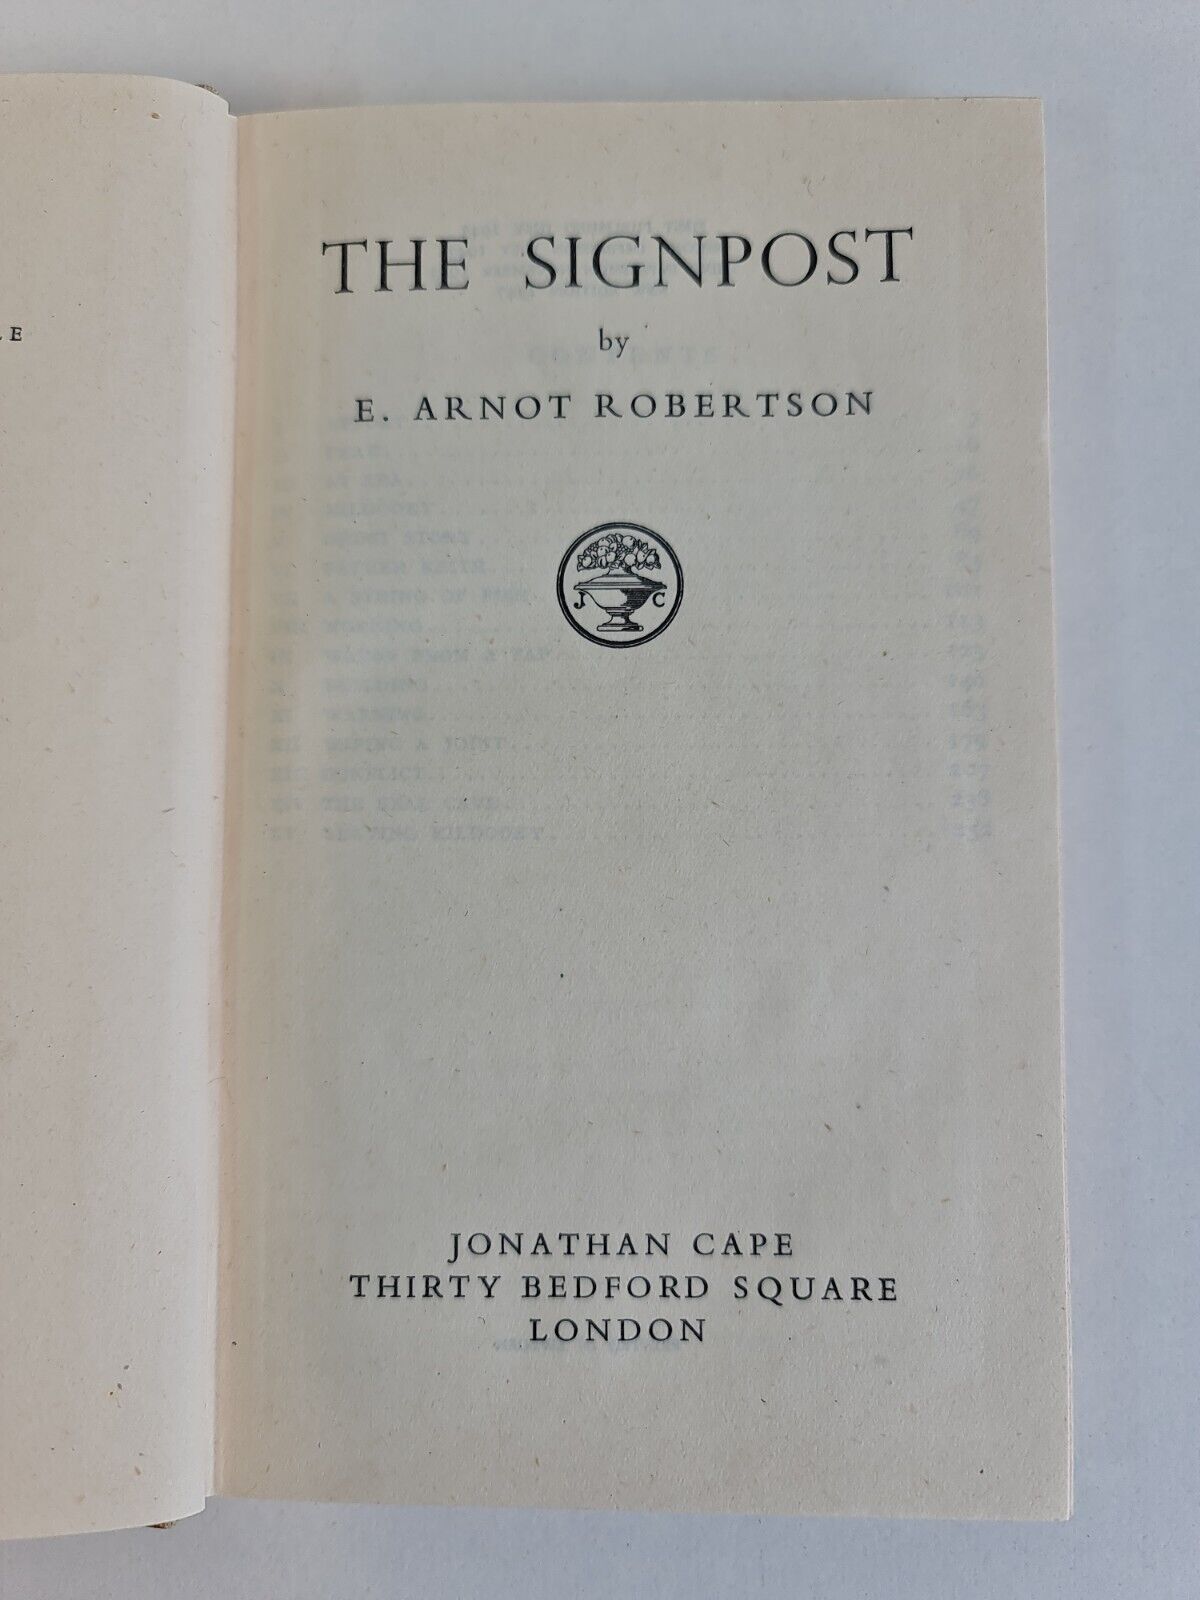 The Signpost by E. Arnot Robertson (1947)